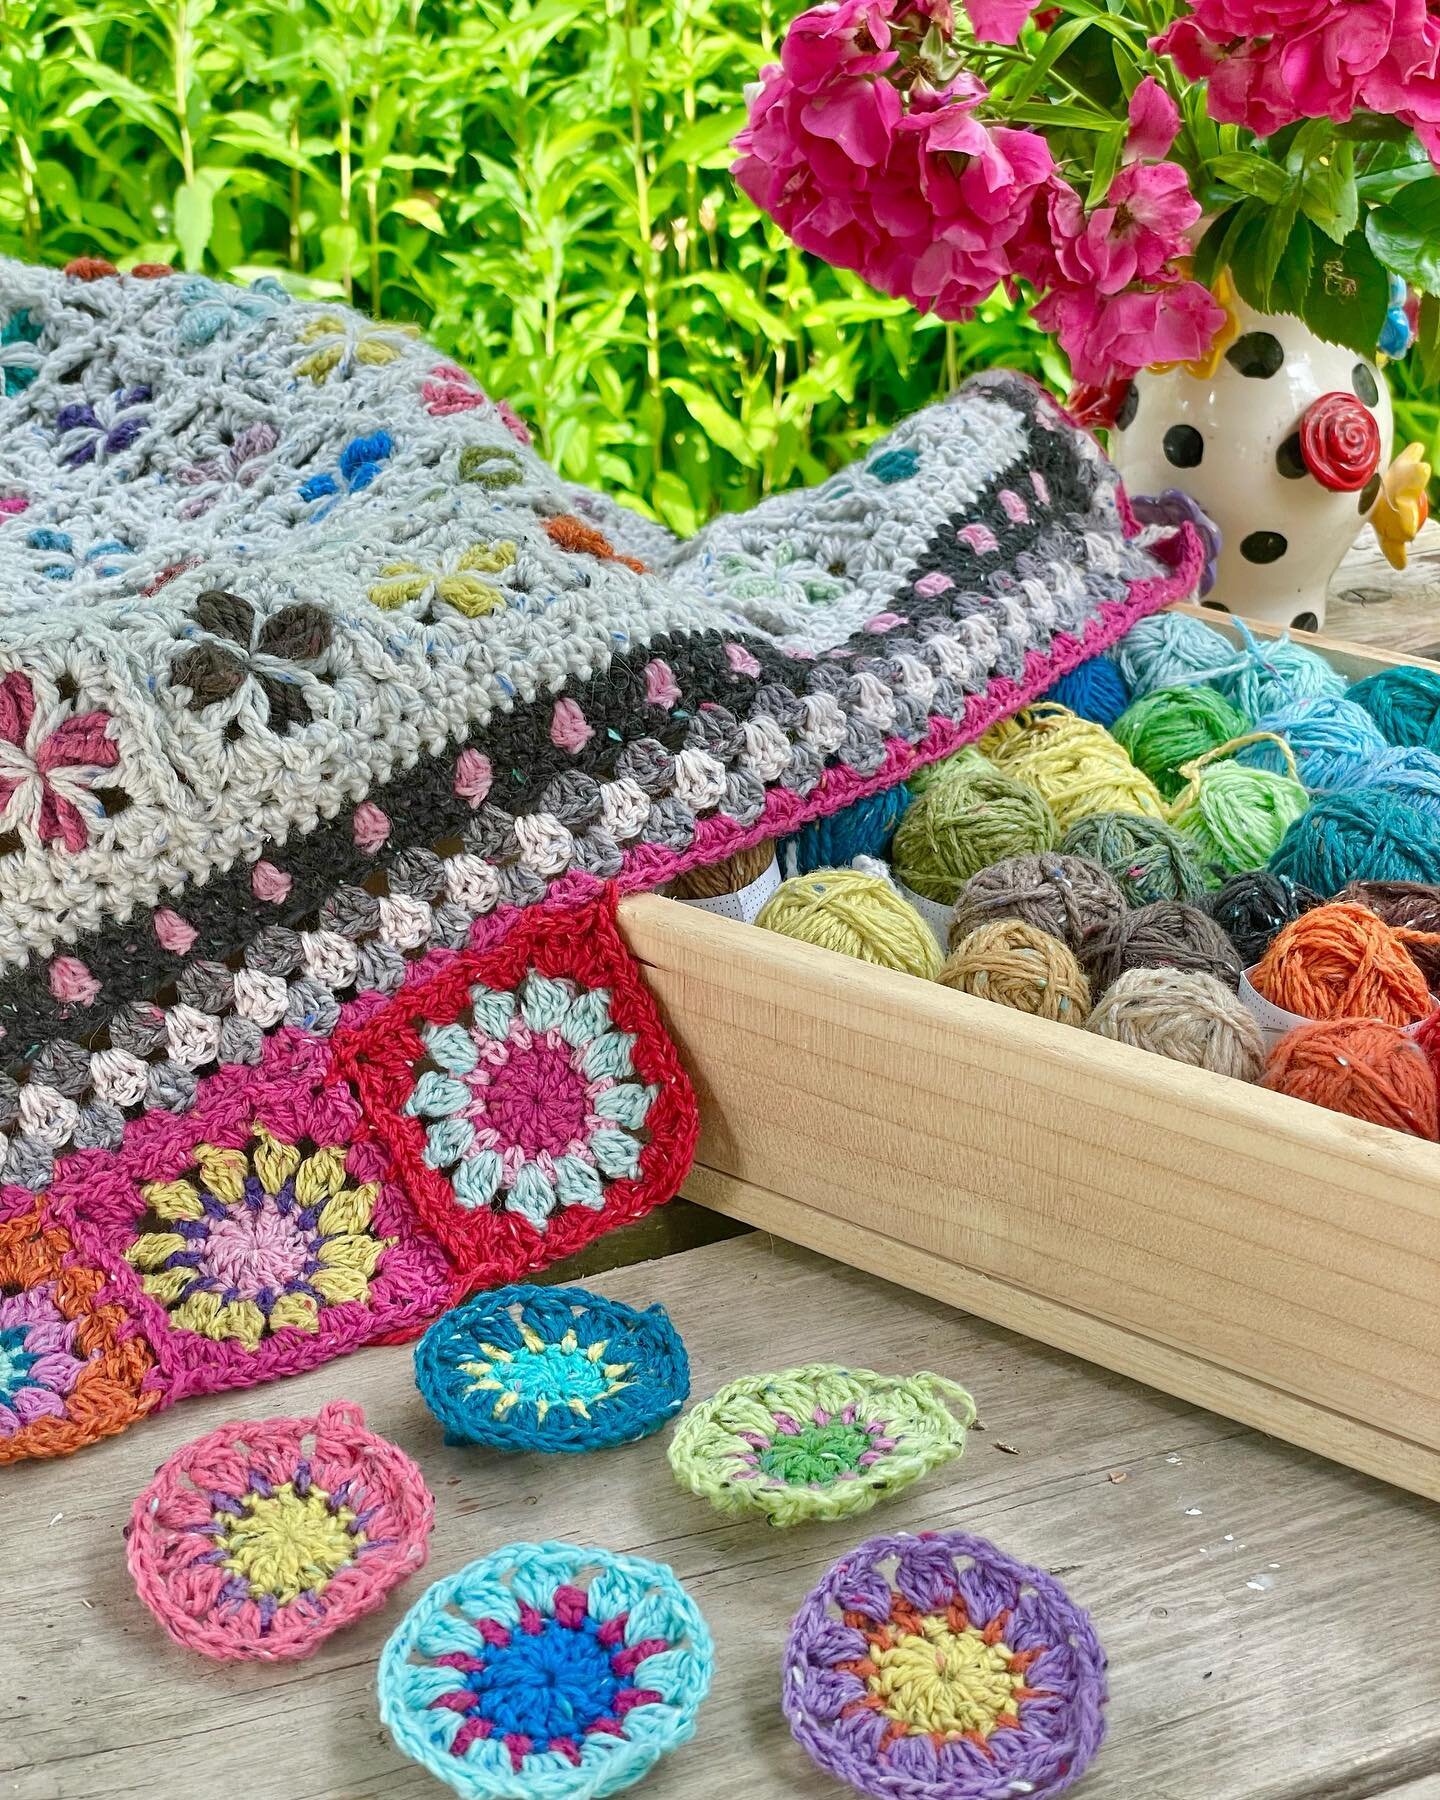 It was almost &hellip;. almost&hellip;too hot to crochet today🥵 but I battled through the heat like a true crochet champion 😂&hellip; mostly because I am OBSESSED with my  latest @scheepjes Terrazzo colour pack! 
.
#terrazzocolourpack #colourfulcro